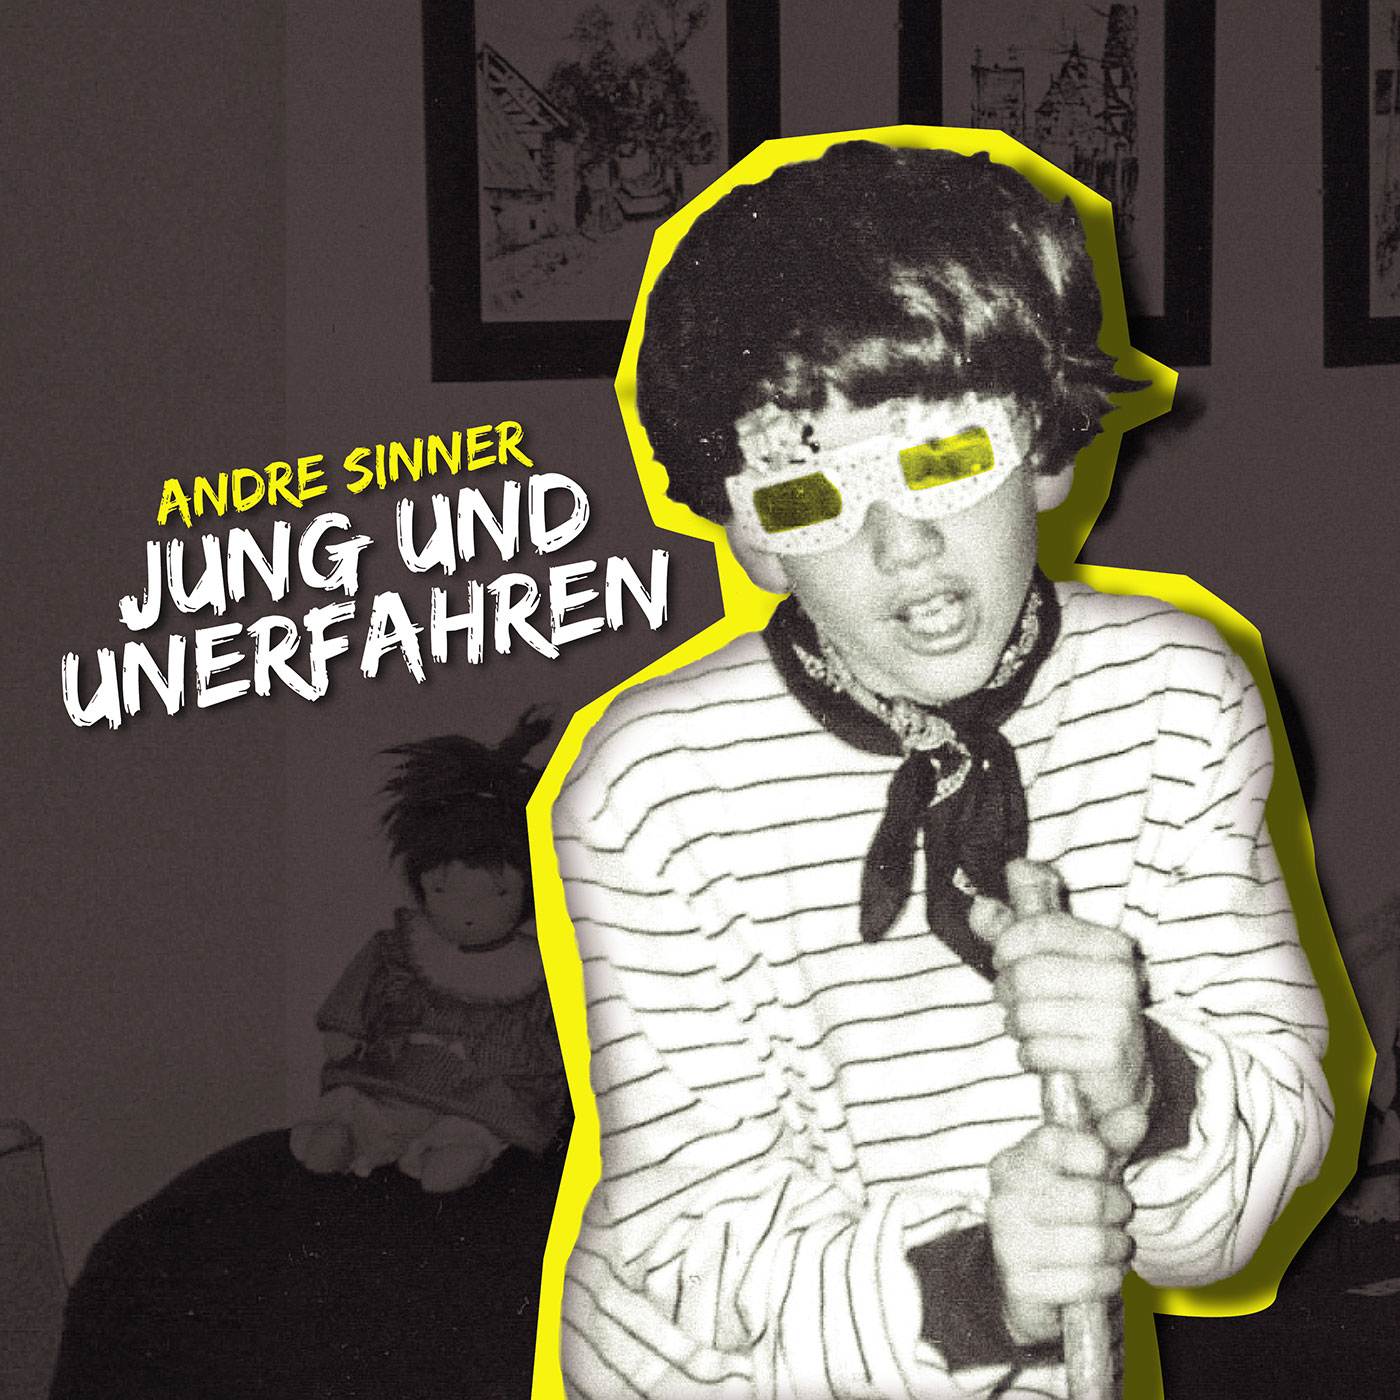 You are currently viewing ANDRE SINNER – Jung und unerfahren